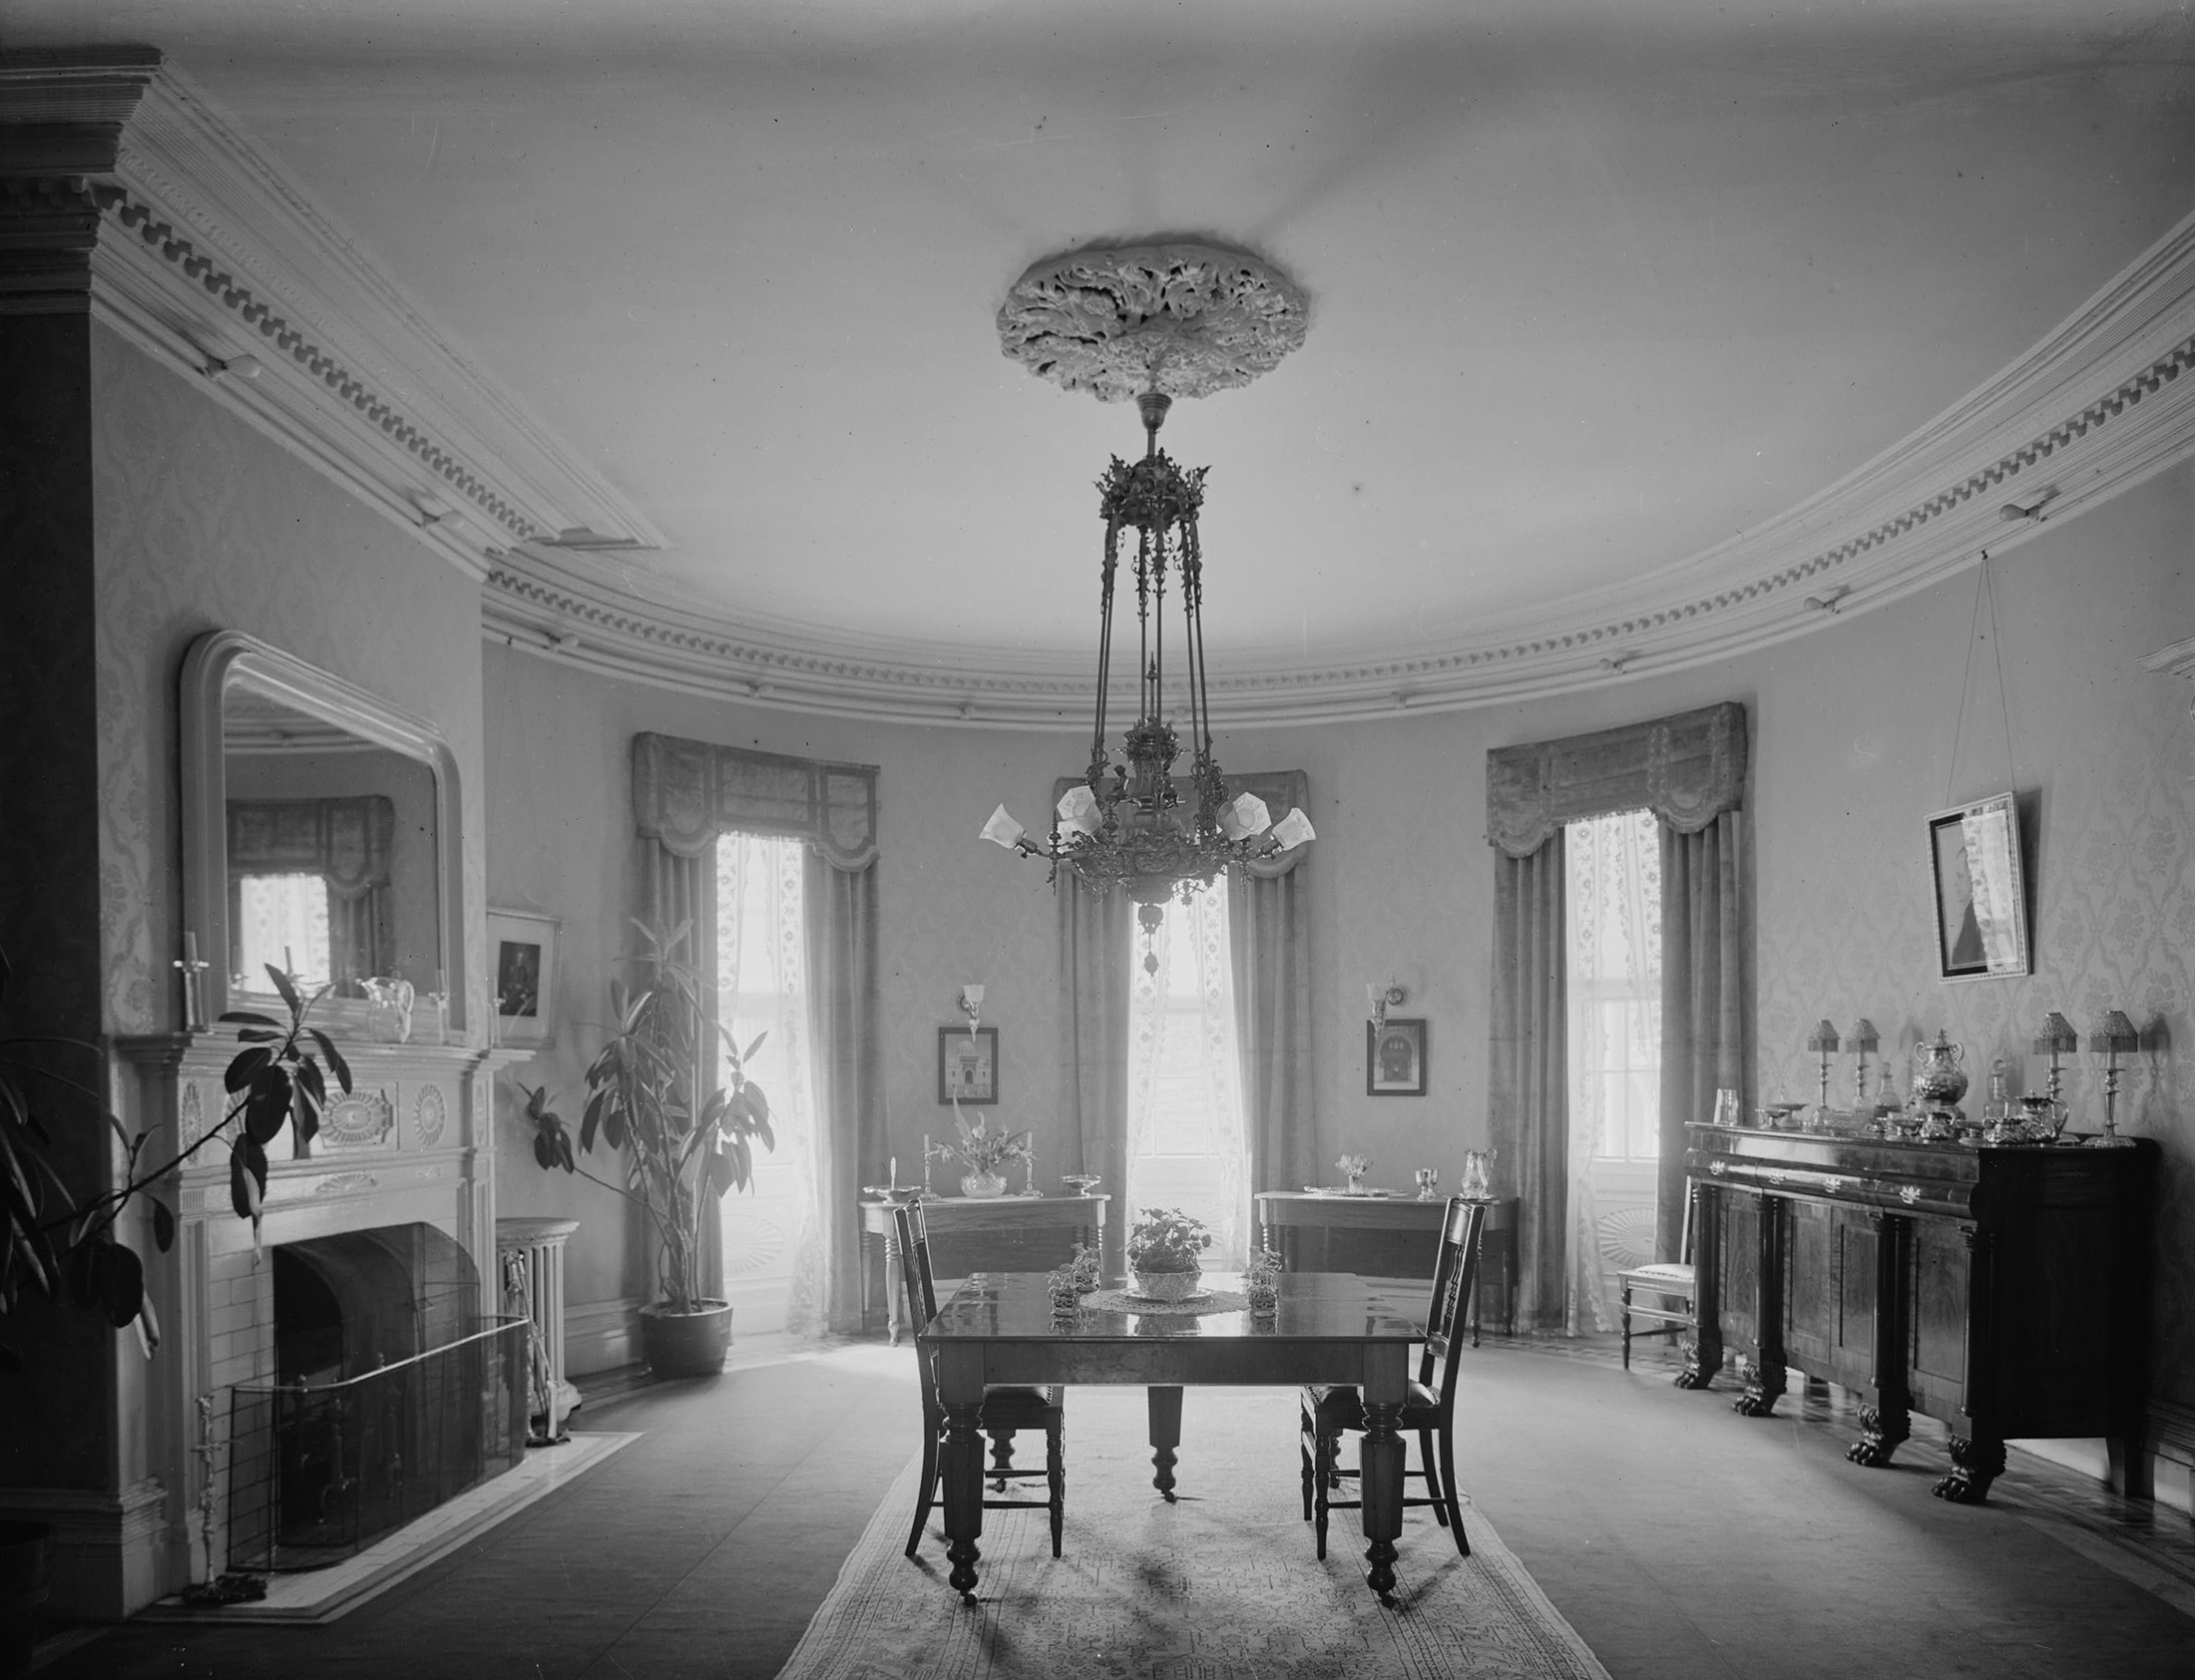 An elaborate foliate medallion anchors a chandelier in a 1914 photograph of the dining room in the circa 1806 Commandant’s House in Vinegar Hill